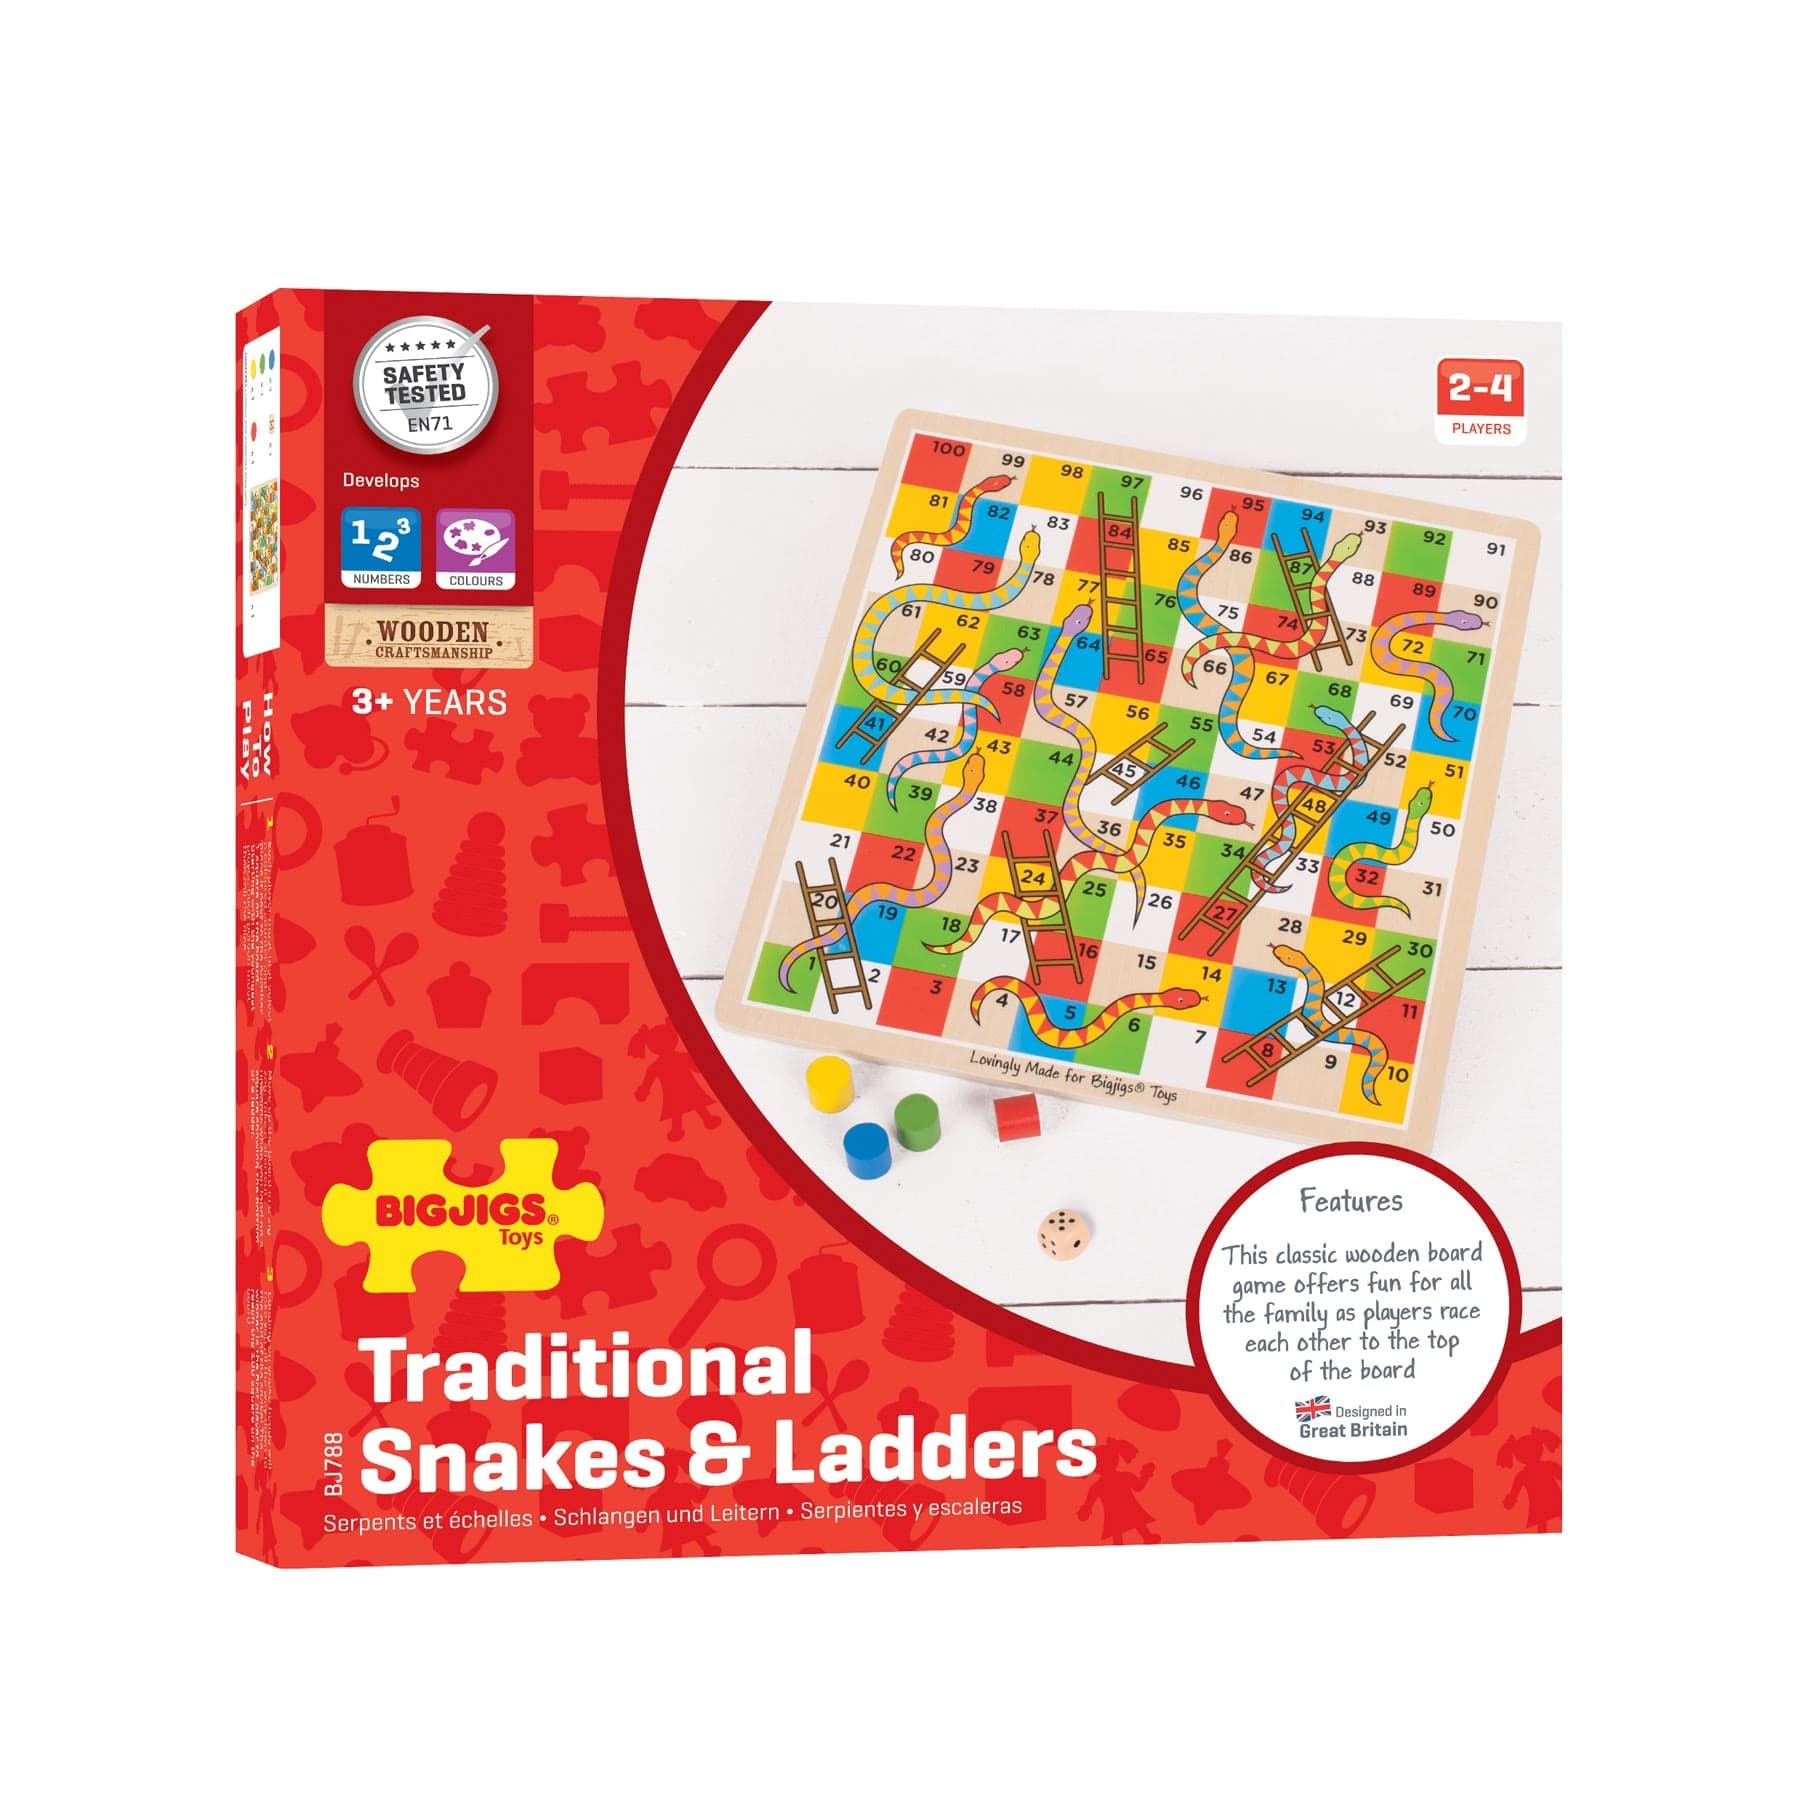 Traditional snakes & ladders